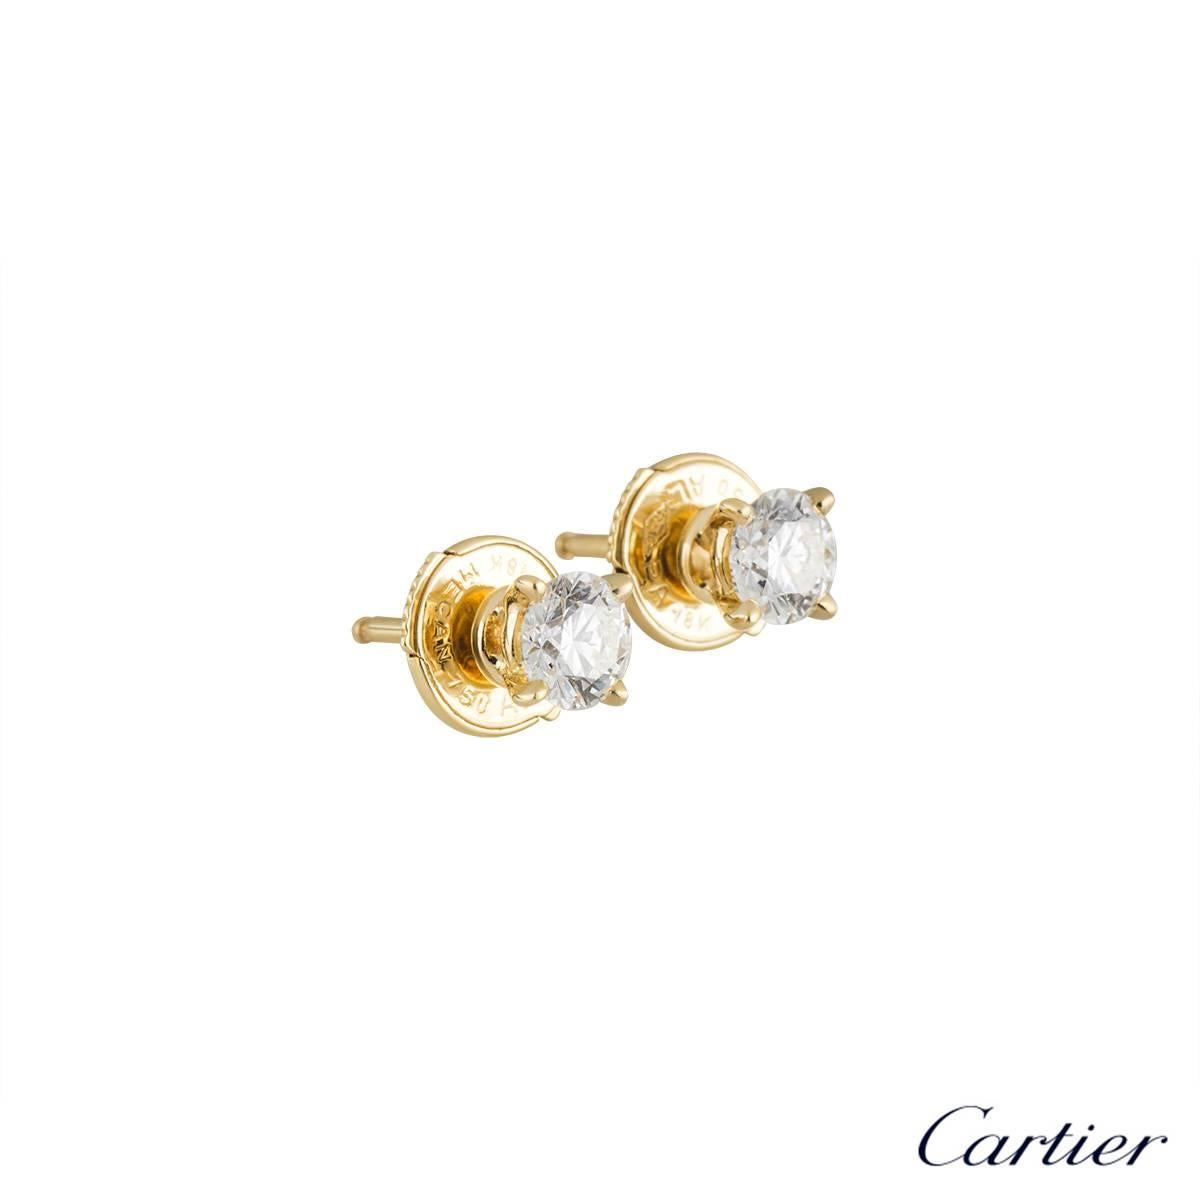 An elegant pair of diamond earrings from the 1895 collection by Cartier. Each earring has a single caw set round brilliant cut diamond, set in 18k yellow gold. The first diamond weighs 0.26ct, is E colour and VS1 in clarity and the second weighs